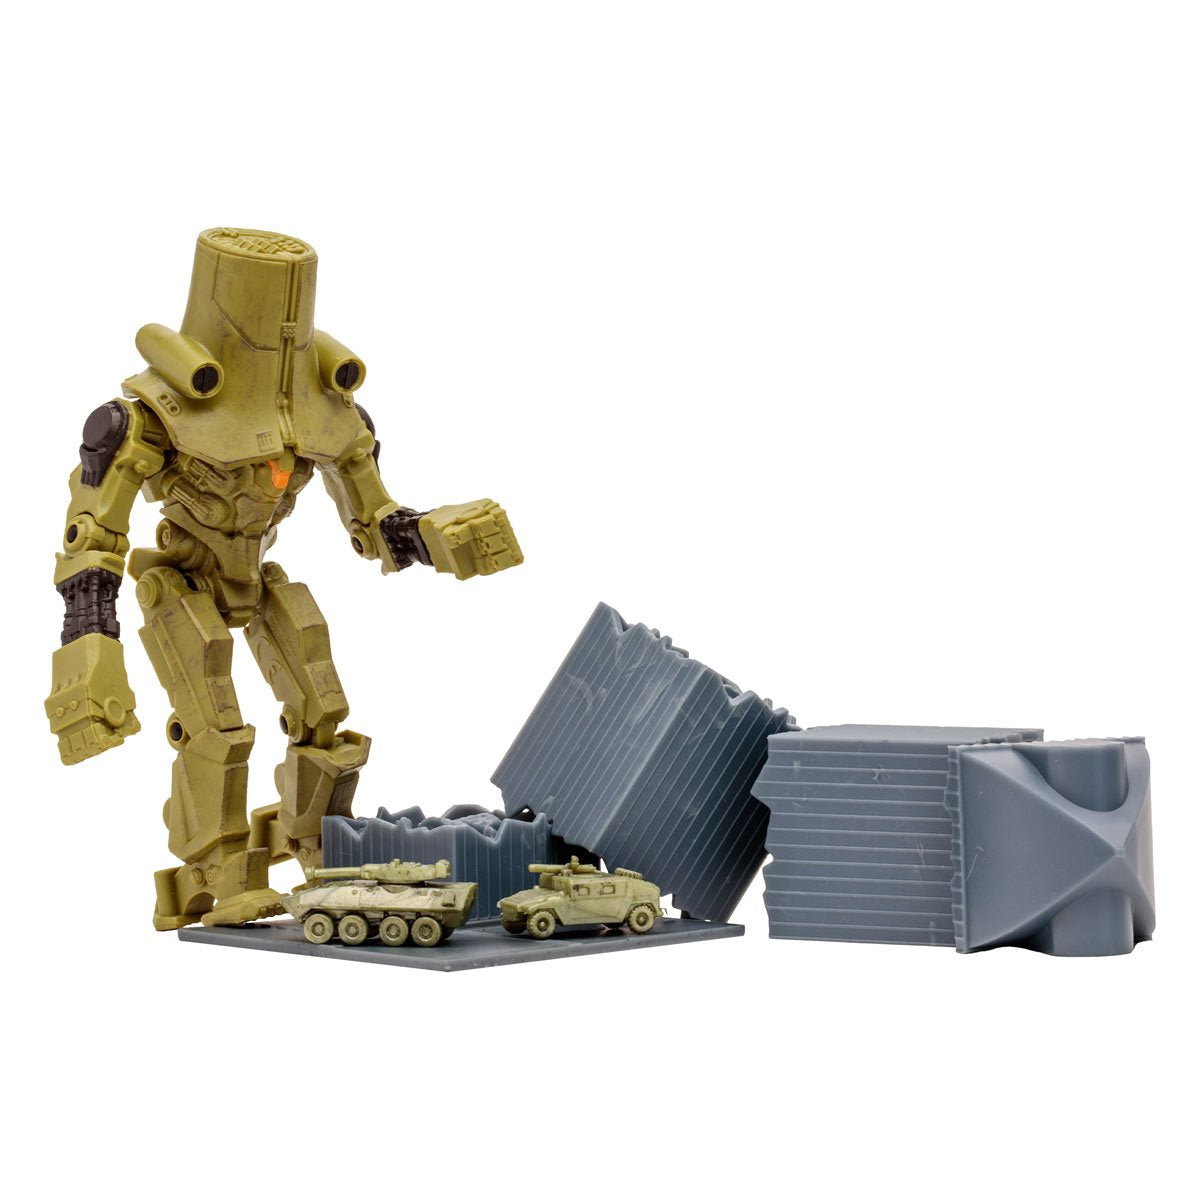 Pacific Rim Jaeger Wave 1 Cherno Alpha 4-Inch Scale Action Figure with Comic Book